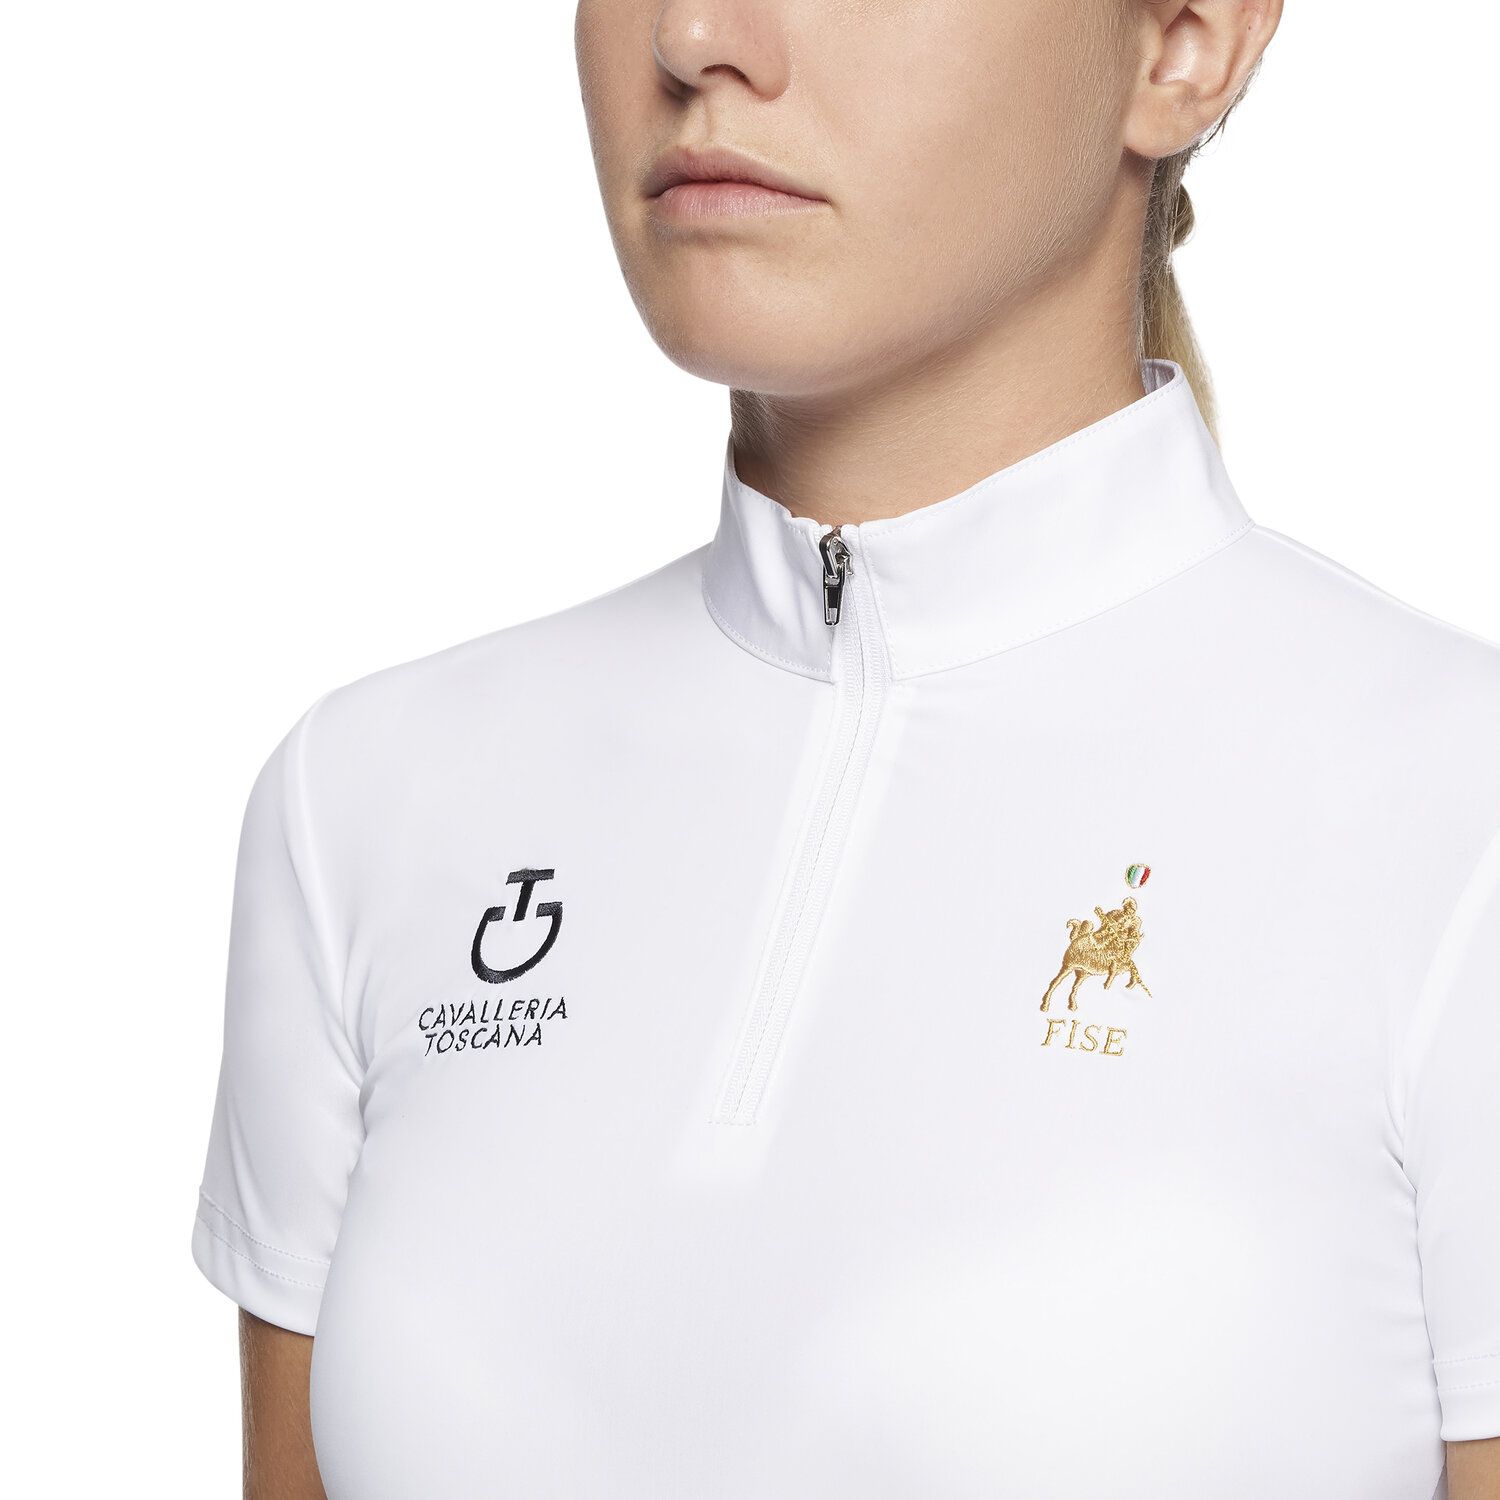 Cavalleria Toscana FISE competition polo shirt for girls with short sleeves WHITE-4